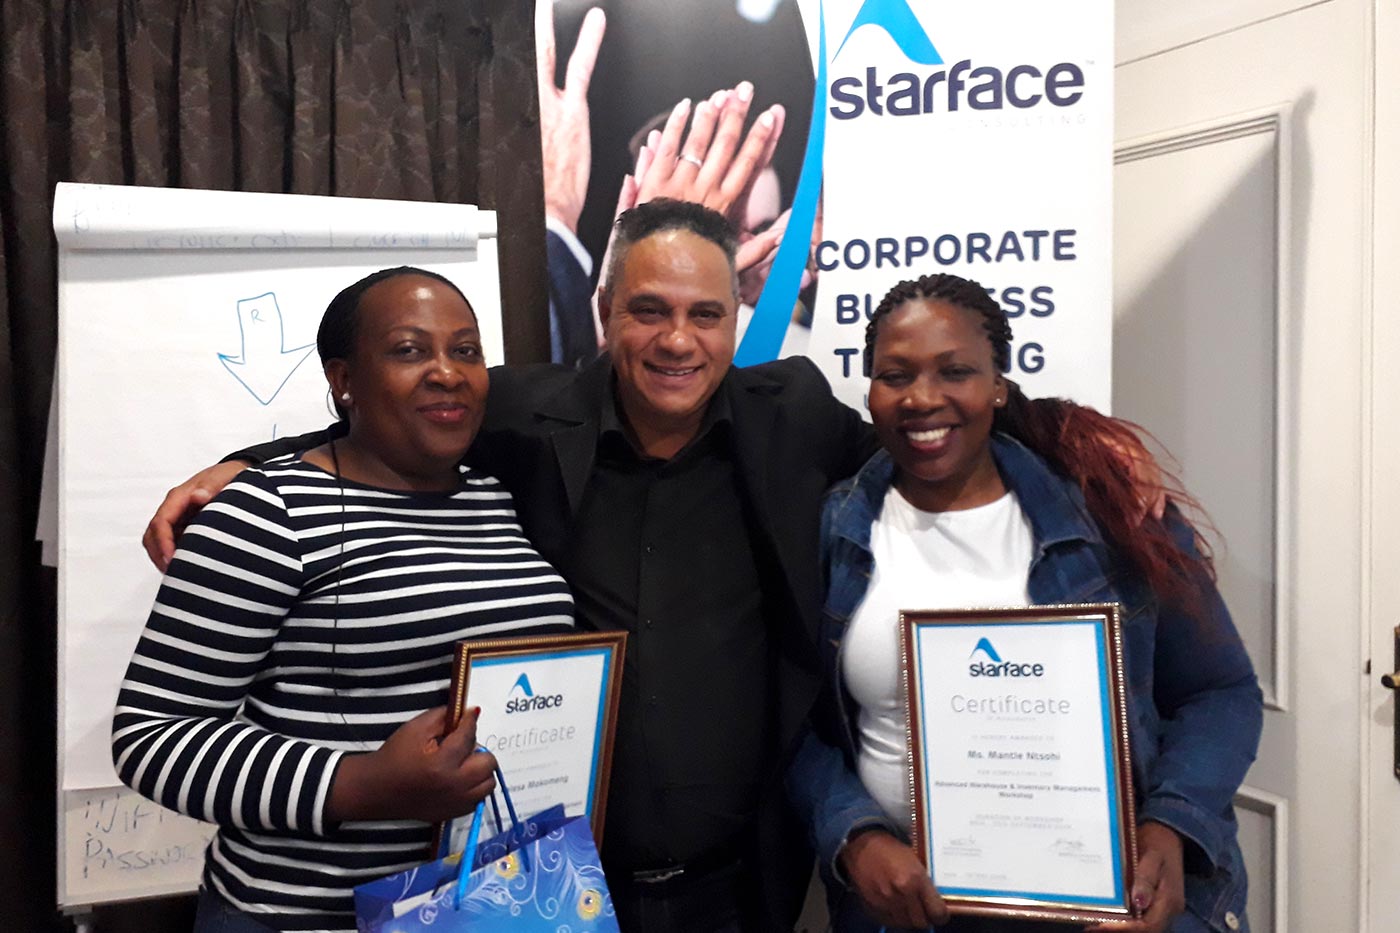 https://starfaceconsulting.co.za/cases/certificate-issuing/